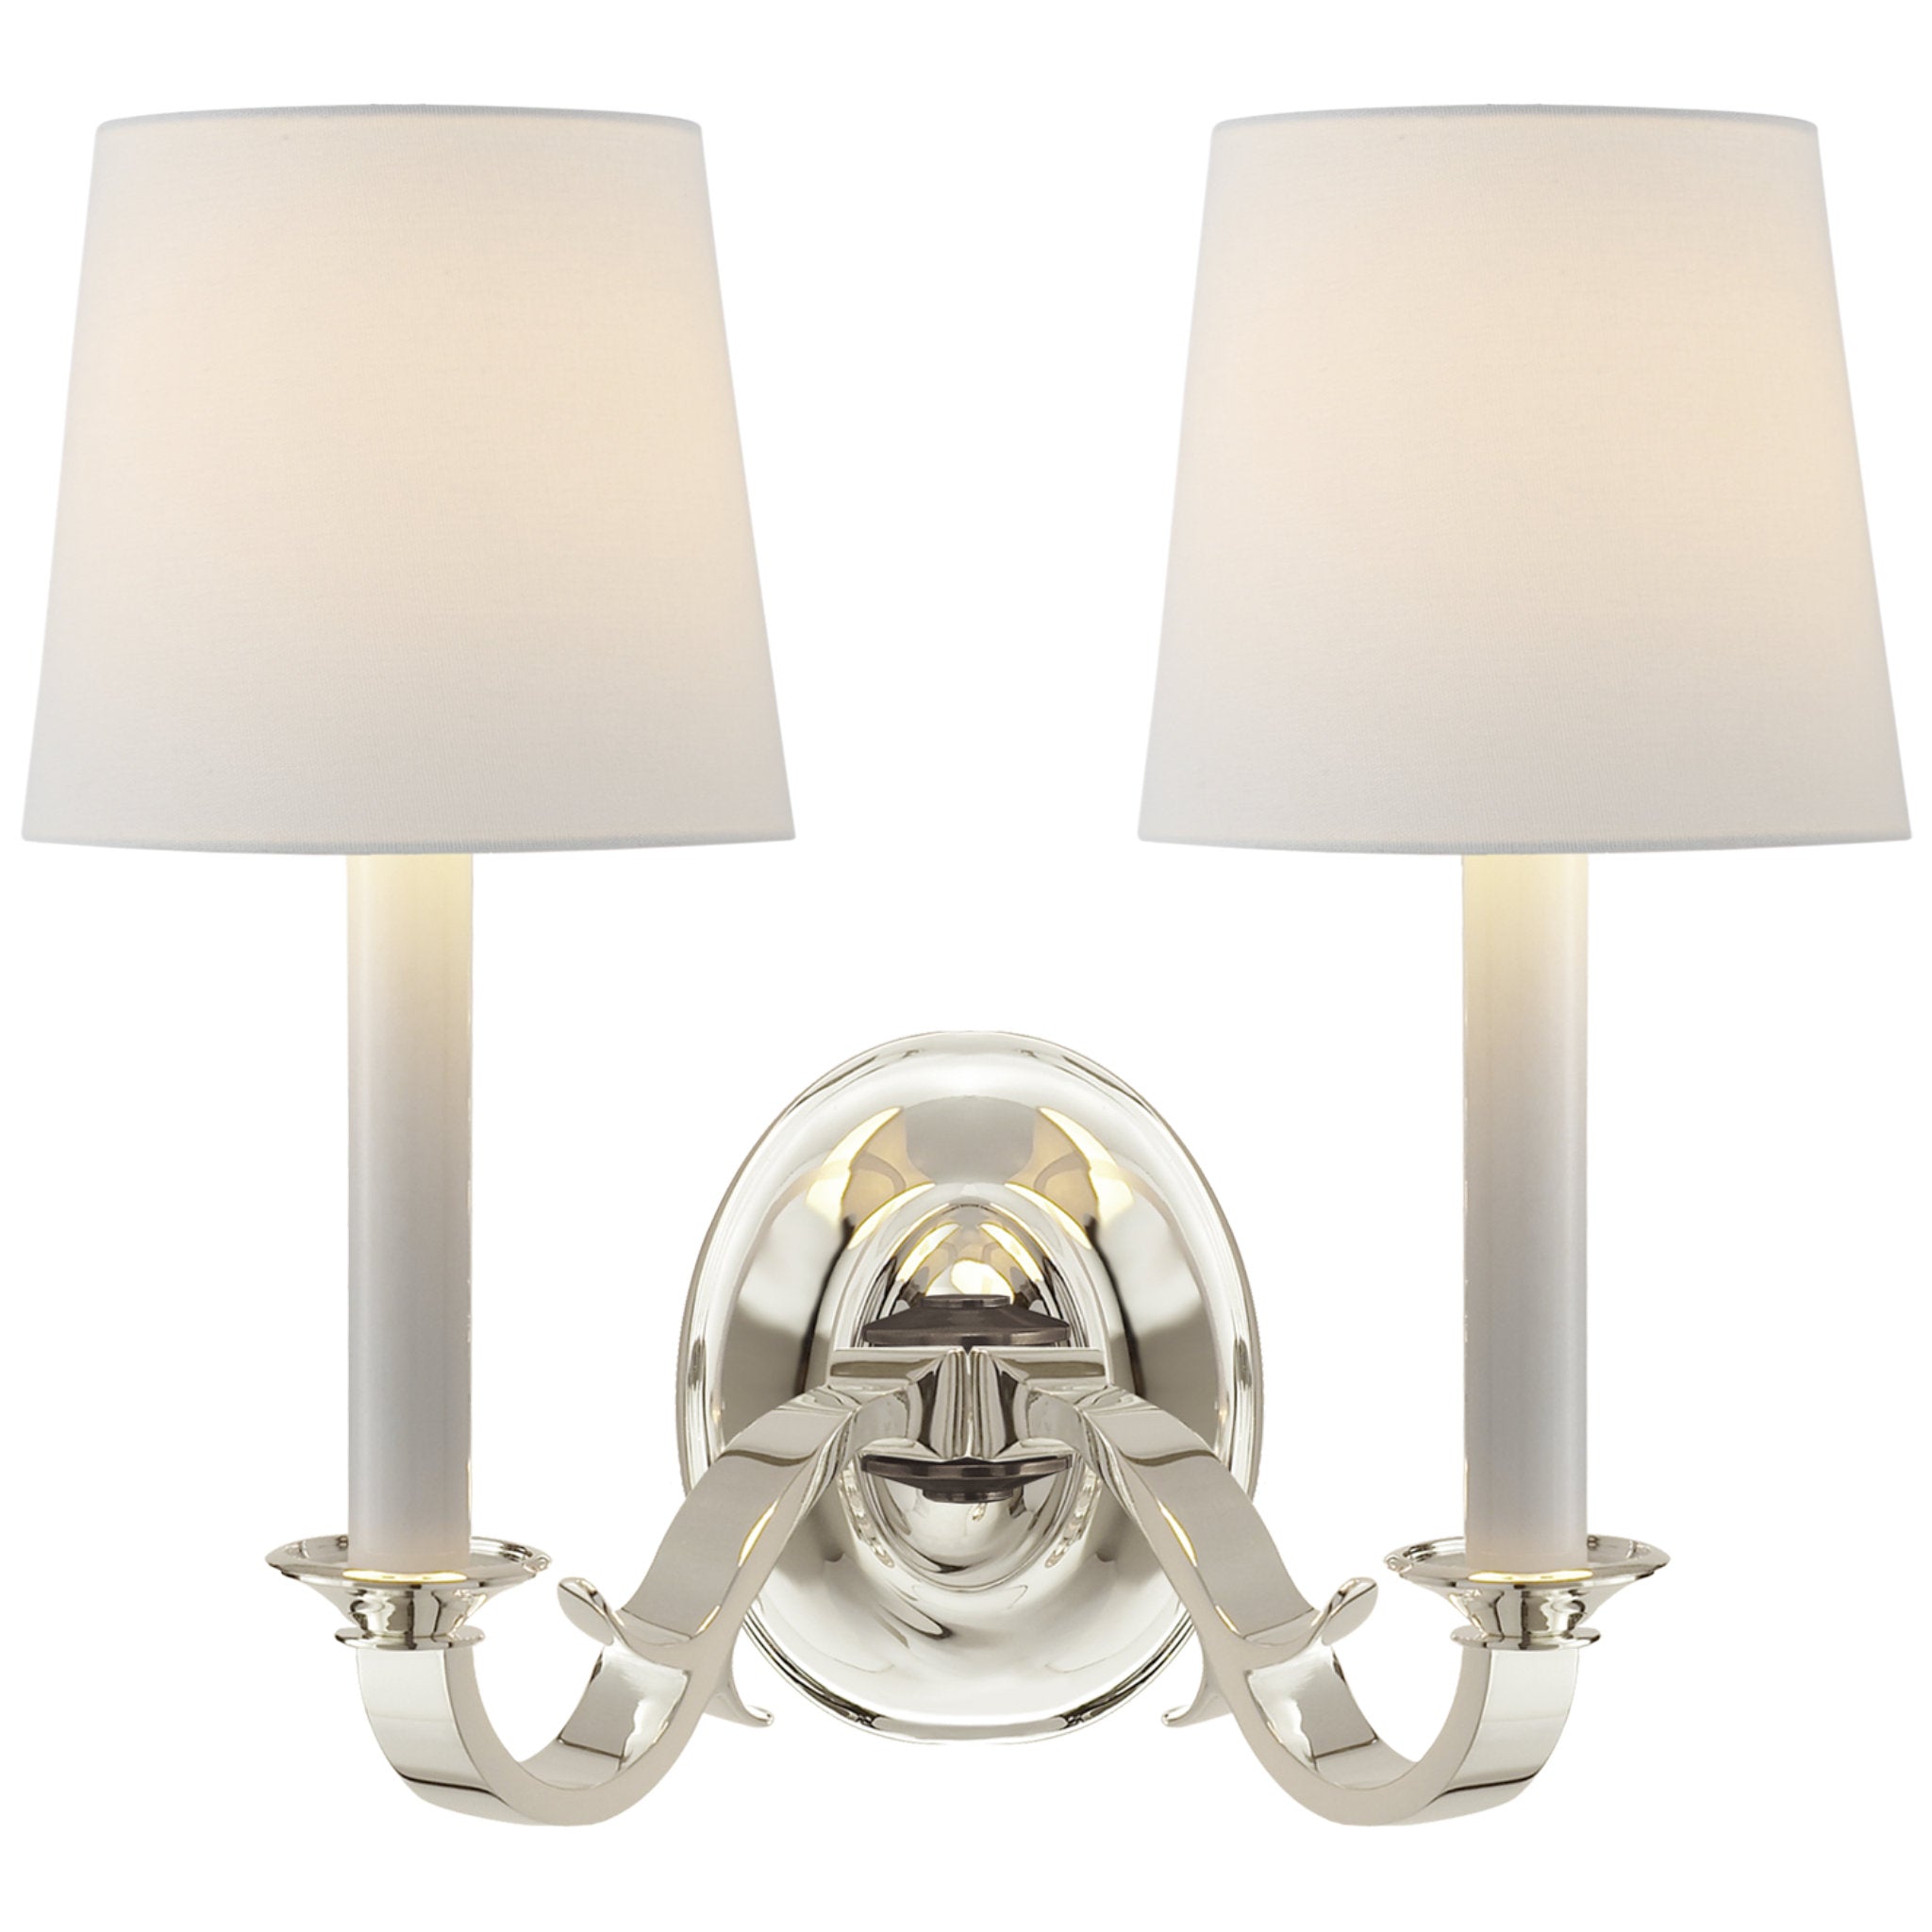 Thomas O'Brien Channing Double Sconce in Polished Silver with Linen Shades